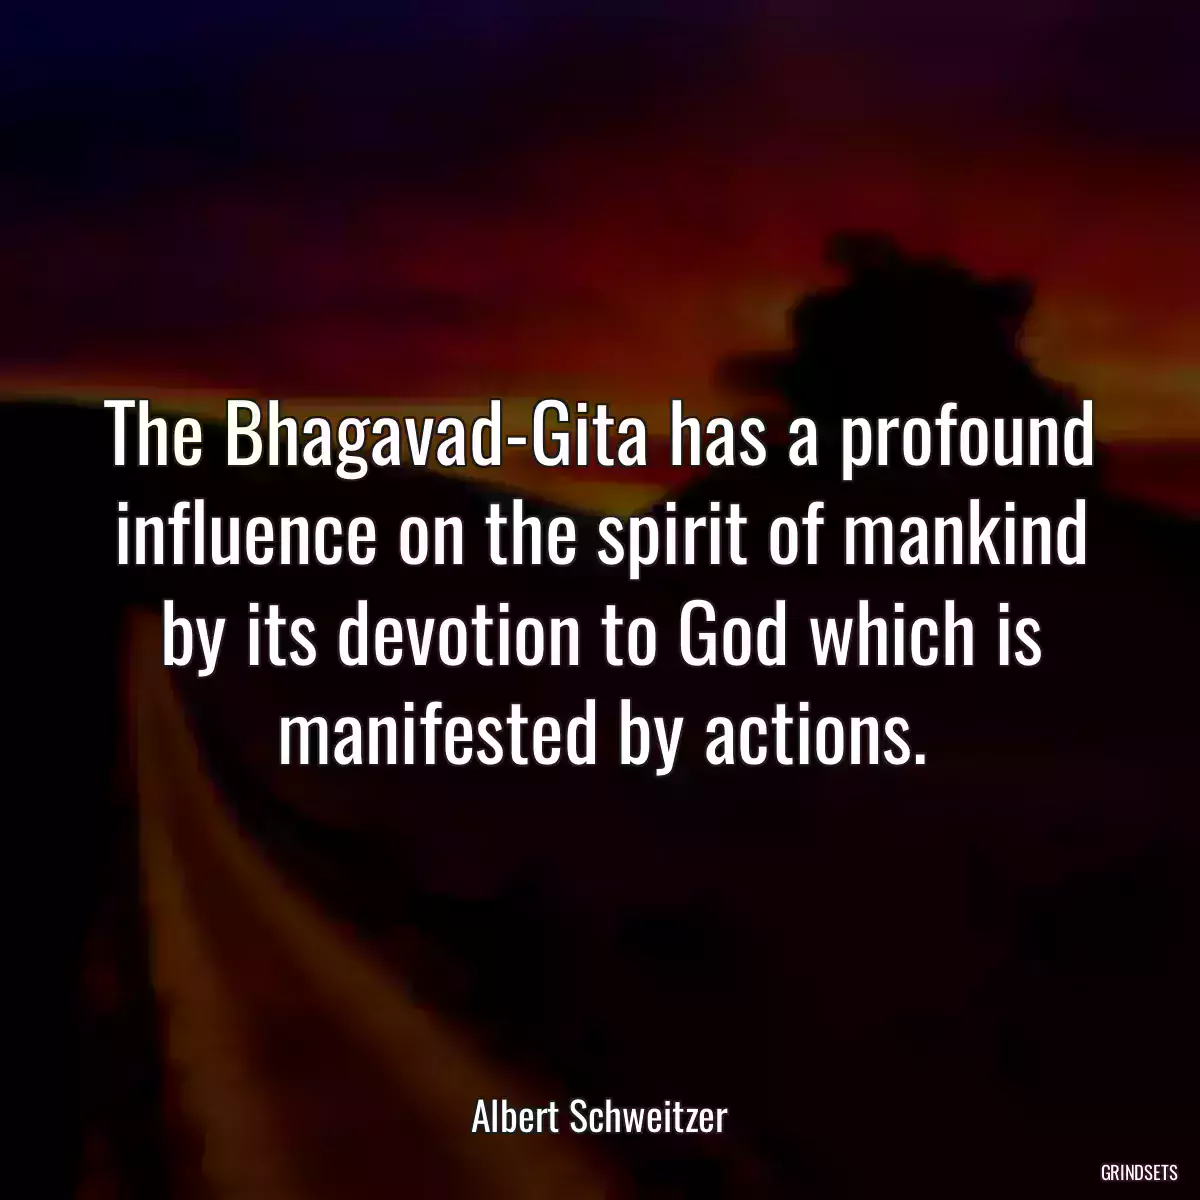 The Bhagavad-Gita has a profound influence on the spirit of mankind by its devotion to God which is manifested by actions.